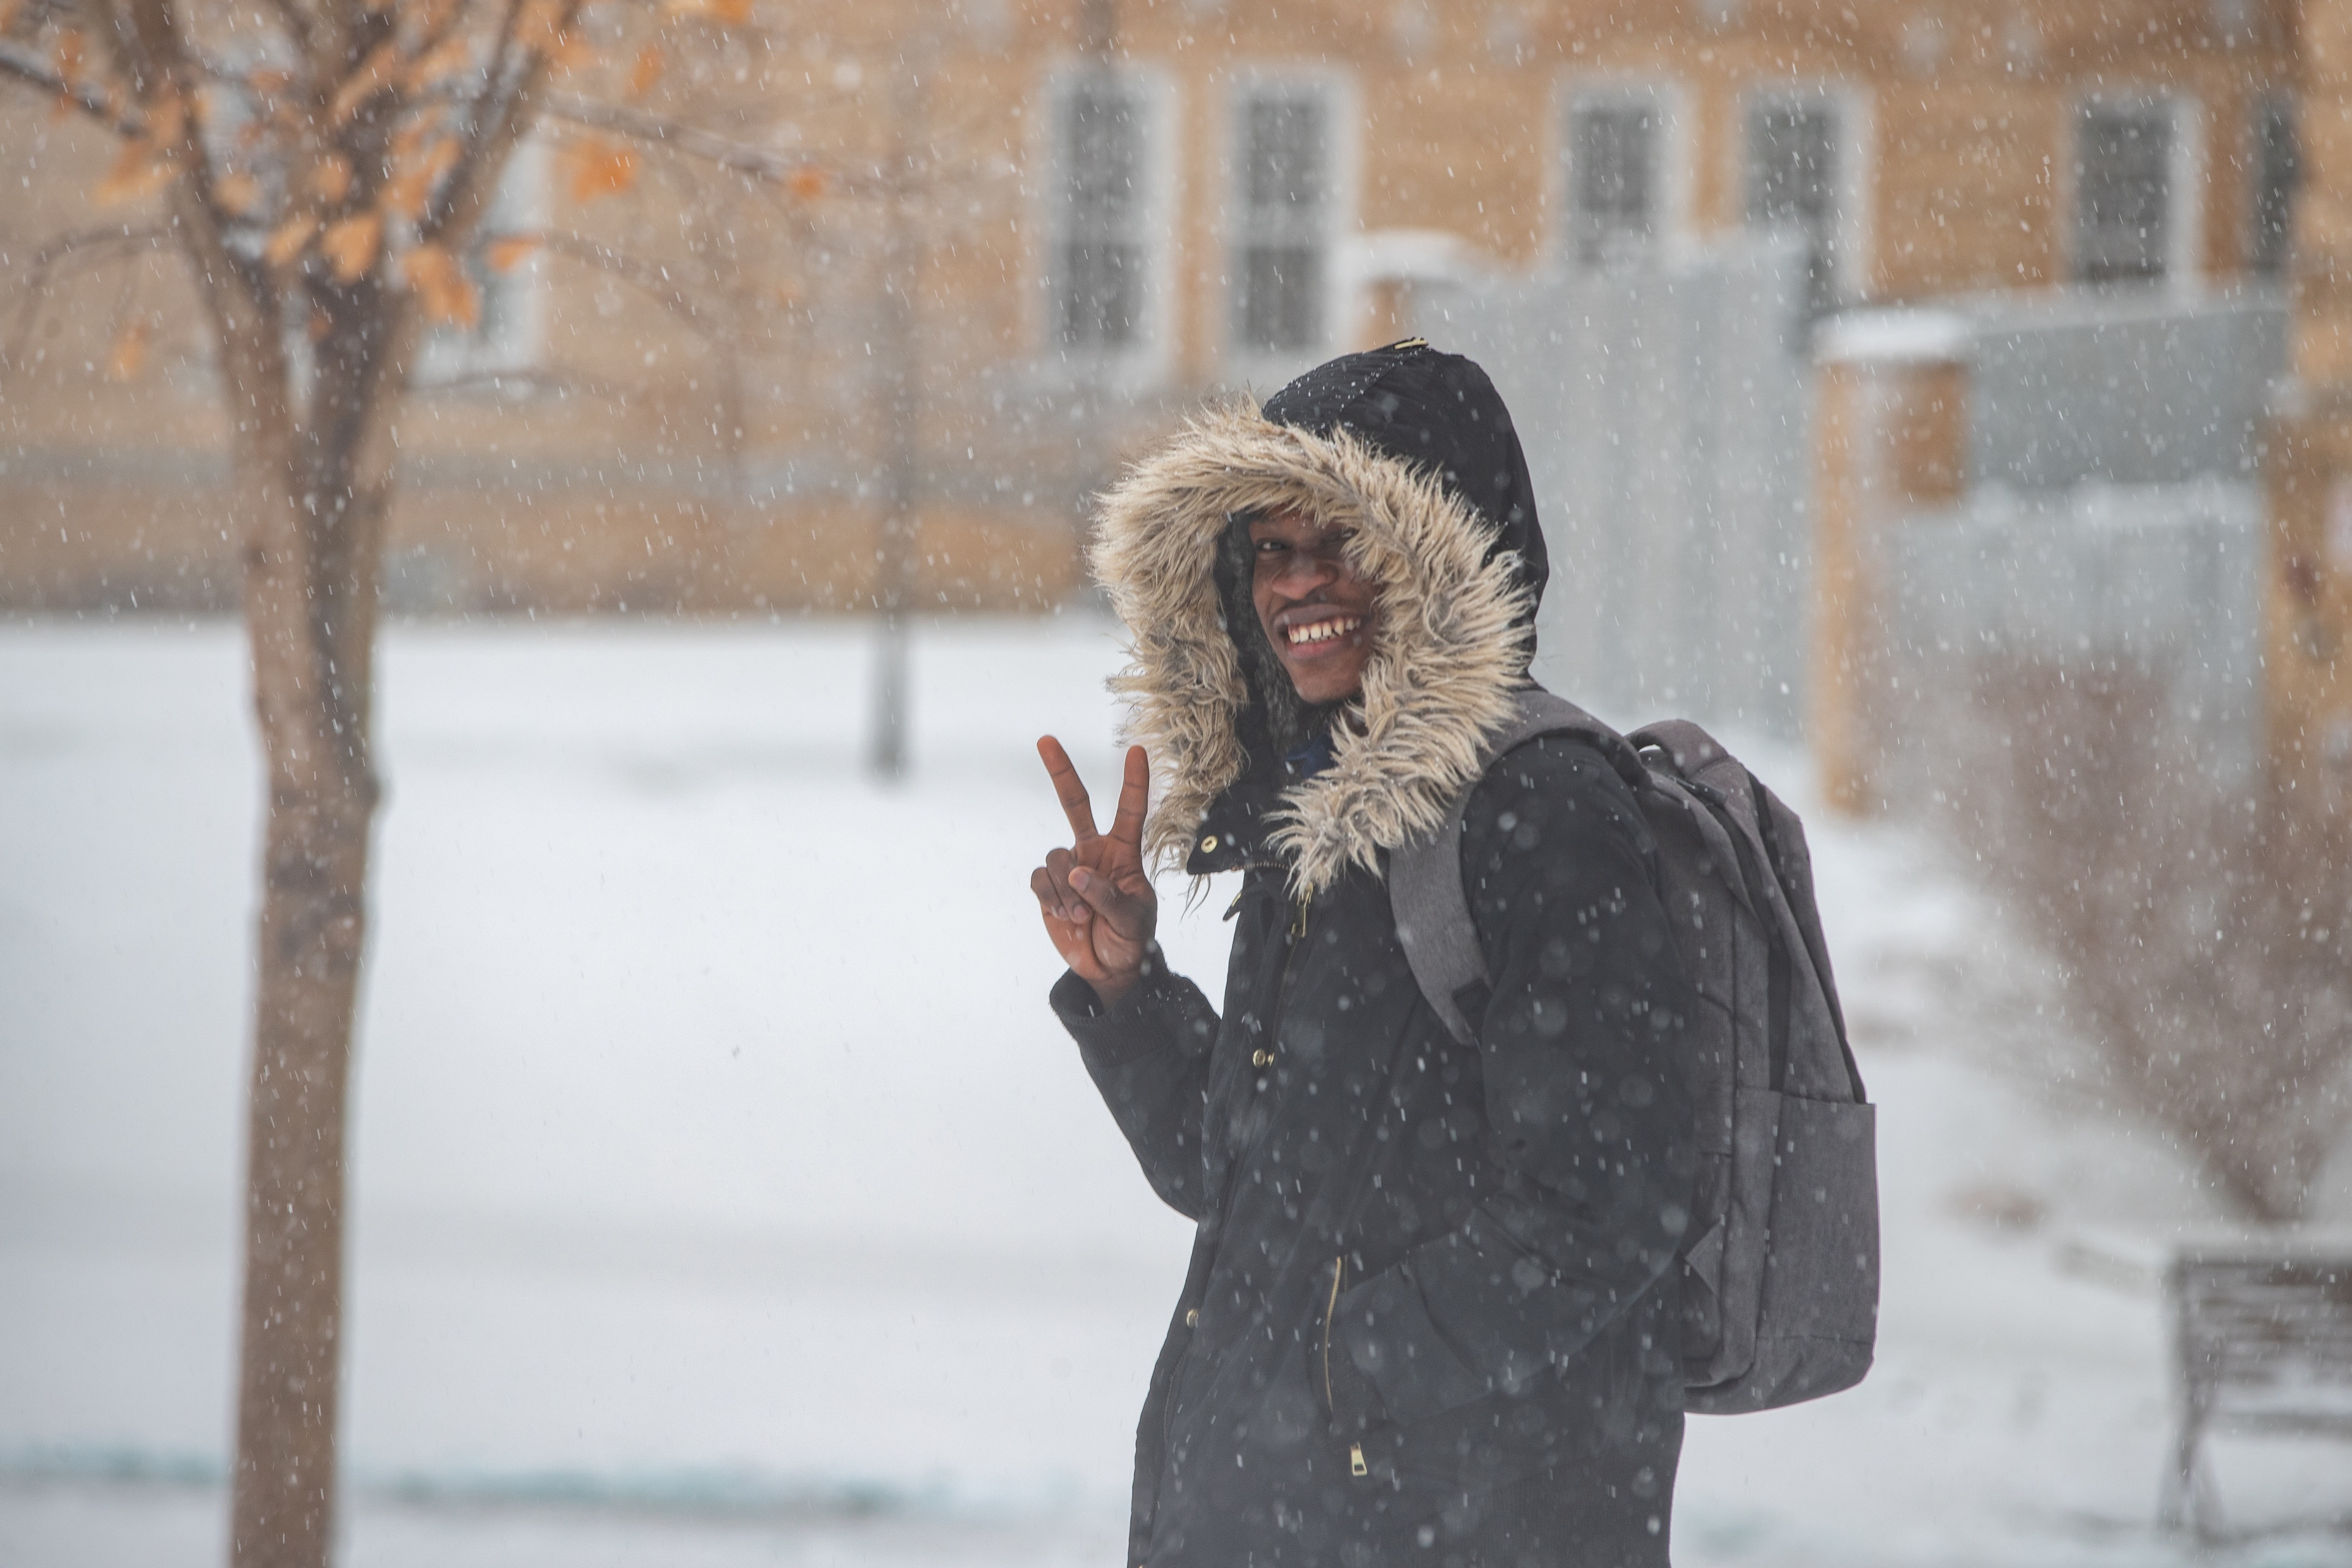 A student gives a peace sign